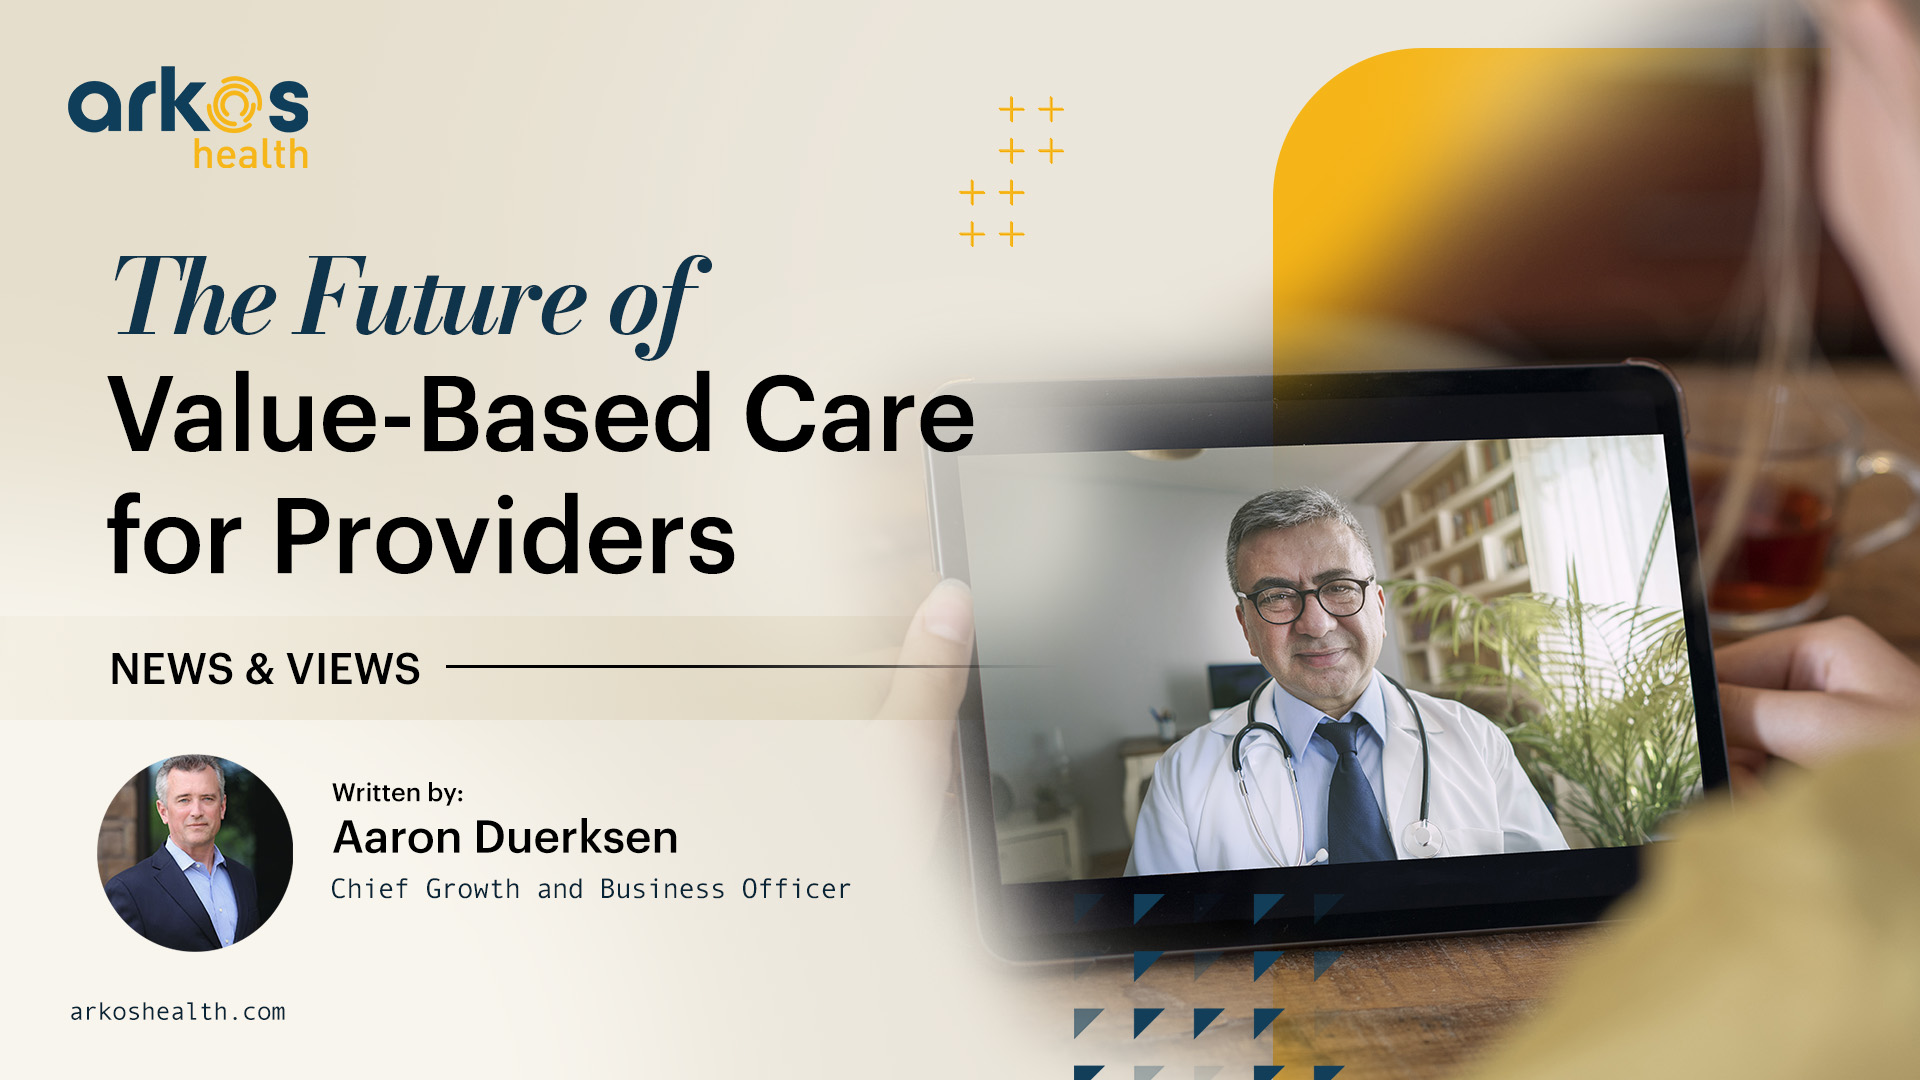 Value-Based Care Challenges for Providers and Implications for Future Adoption